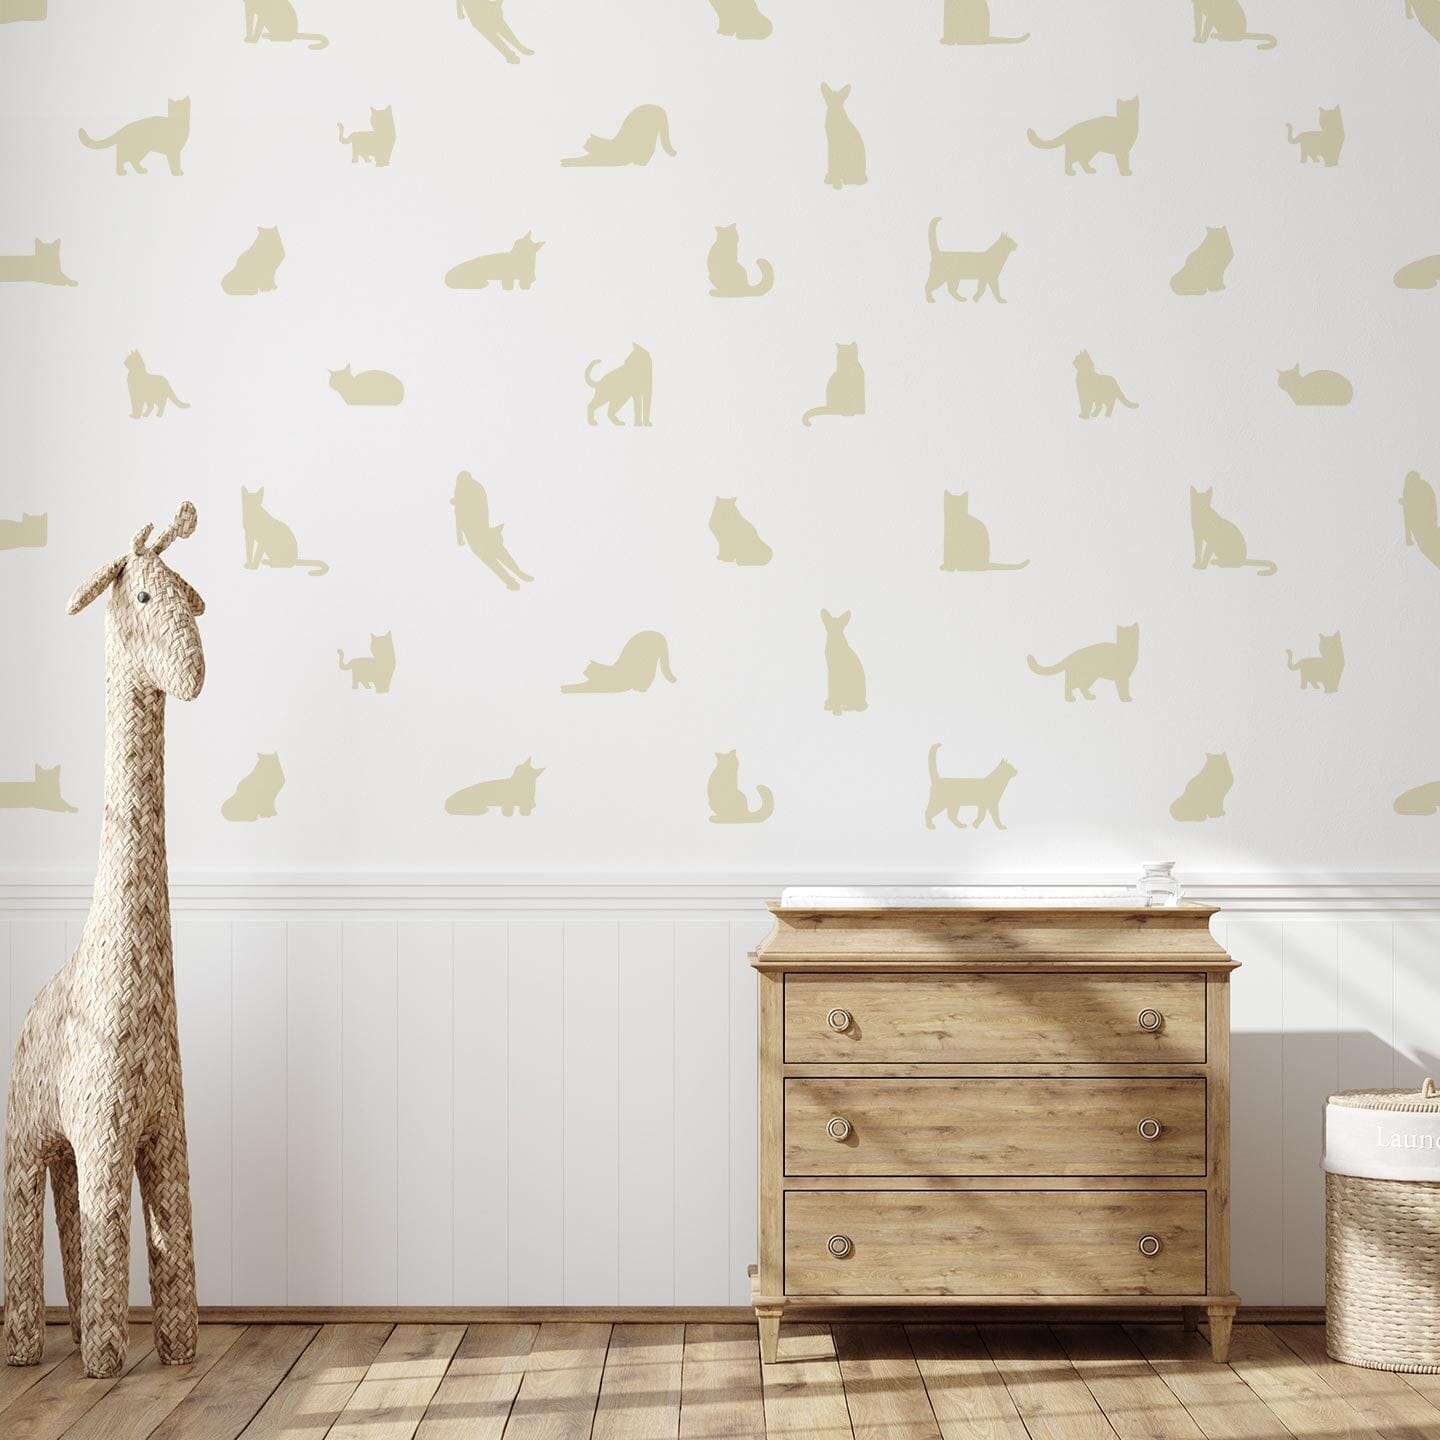 Cat Silhouette Wall Decals